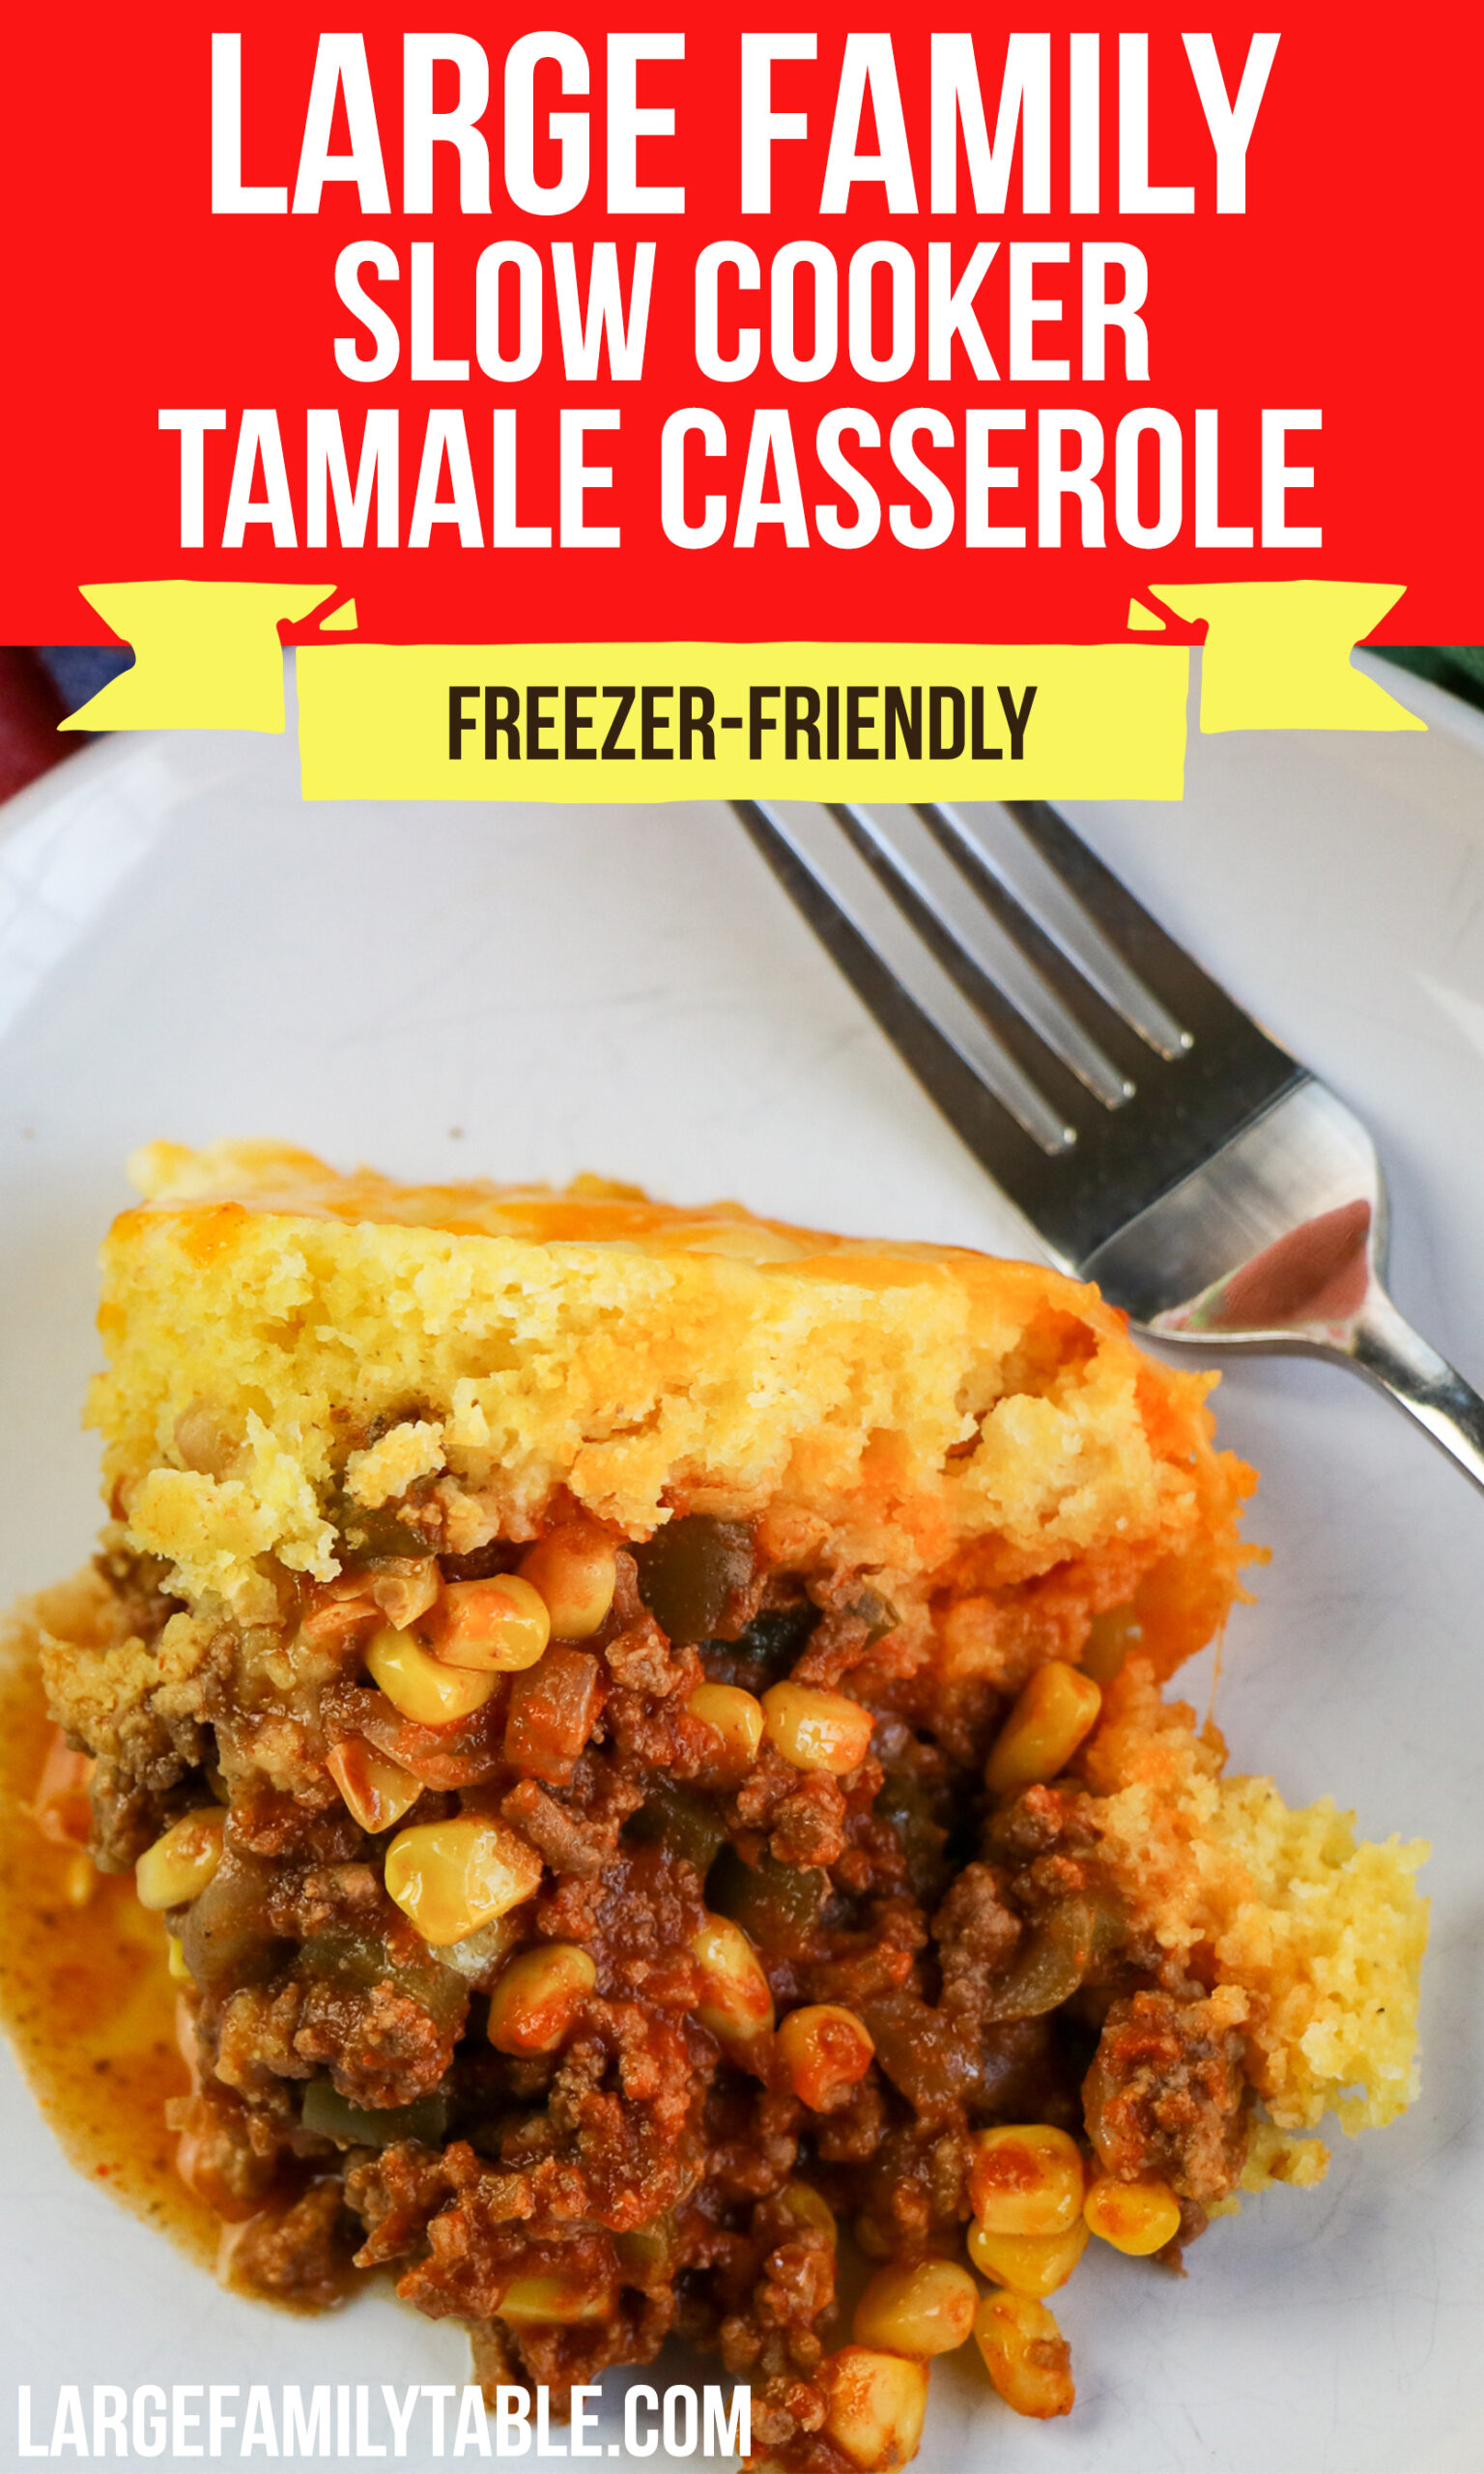 Large Family Slow Cooker Tamale Casserole